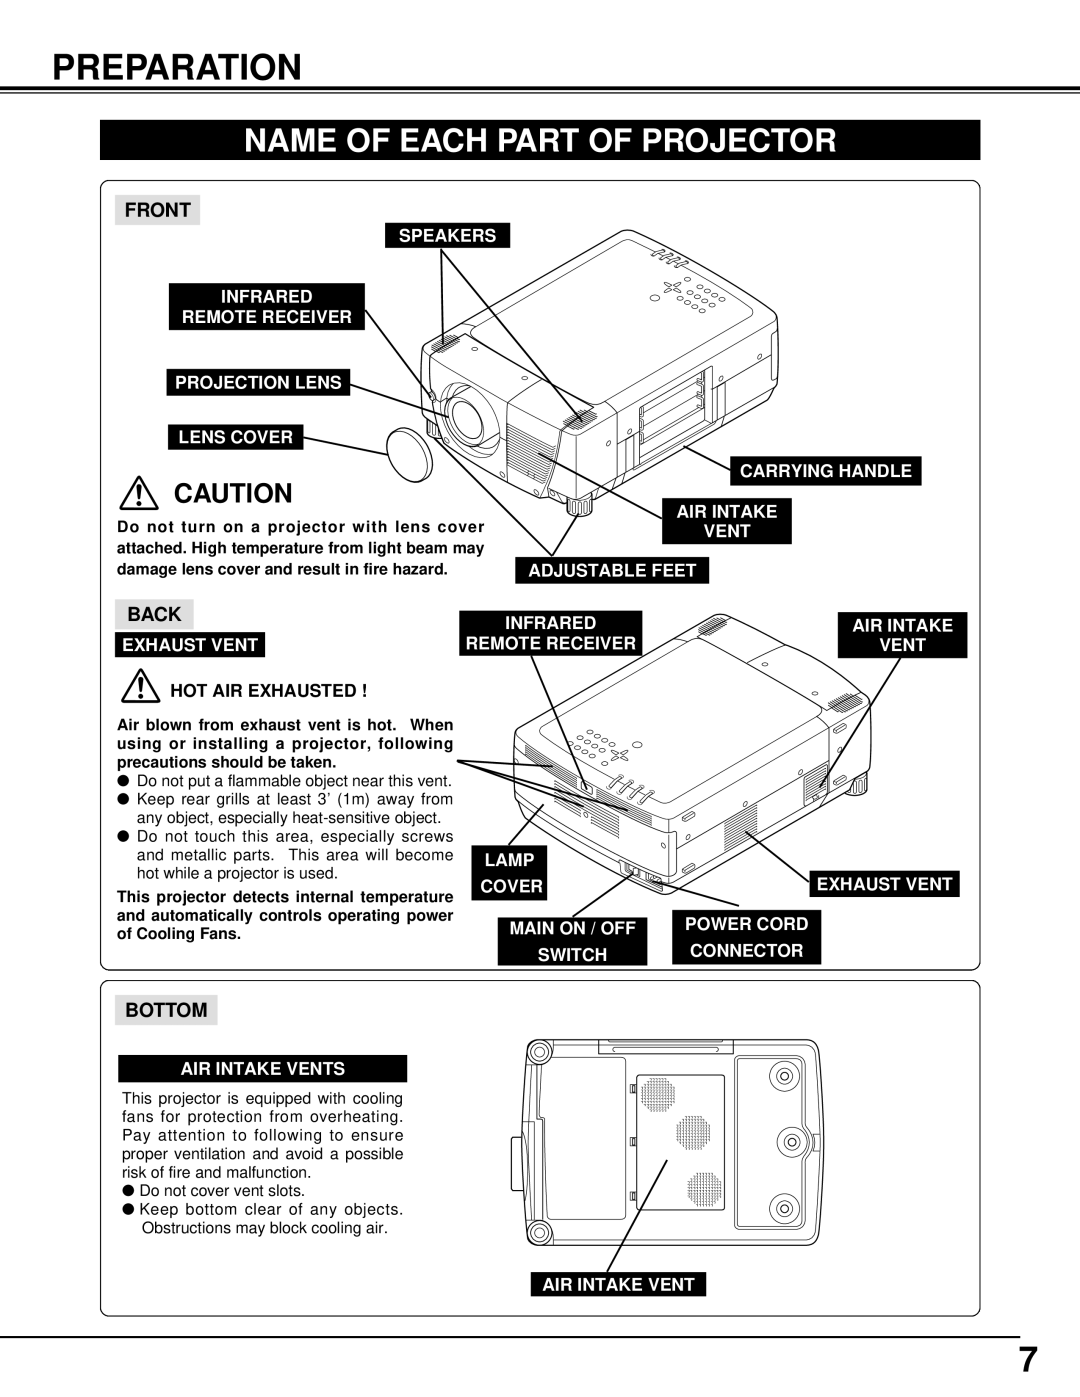 Christie Digital Systems 38-VIV301-01 user manual Preparation, Name Of Each Part Of Projector, Front, Back, Bottom 